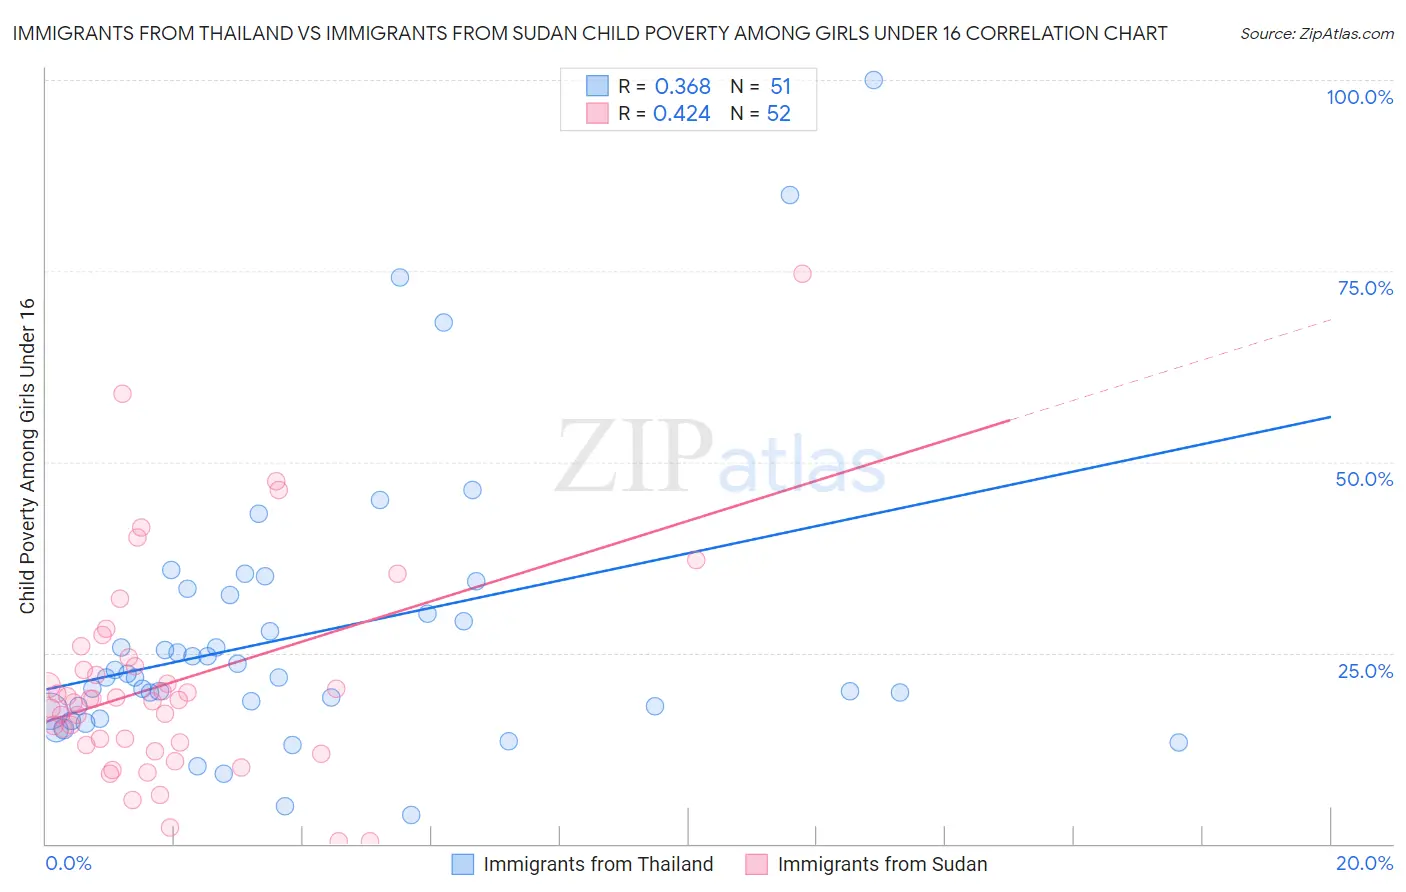 Immigrants from Thailand vs Immigrants from Sudan Child Poverty Among Girls Under 16